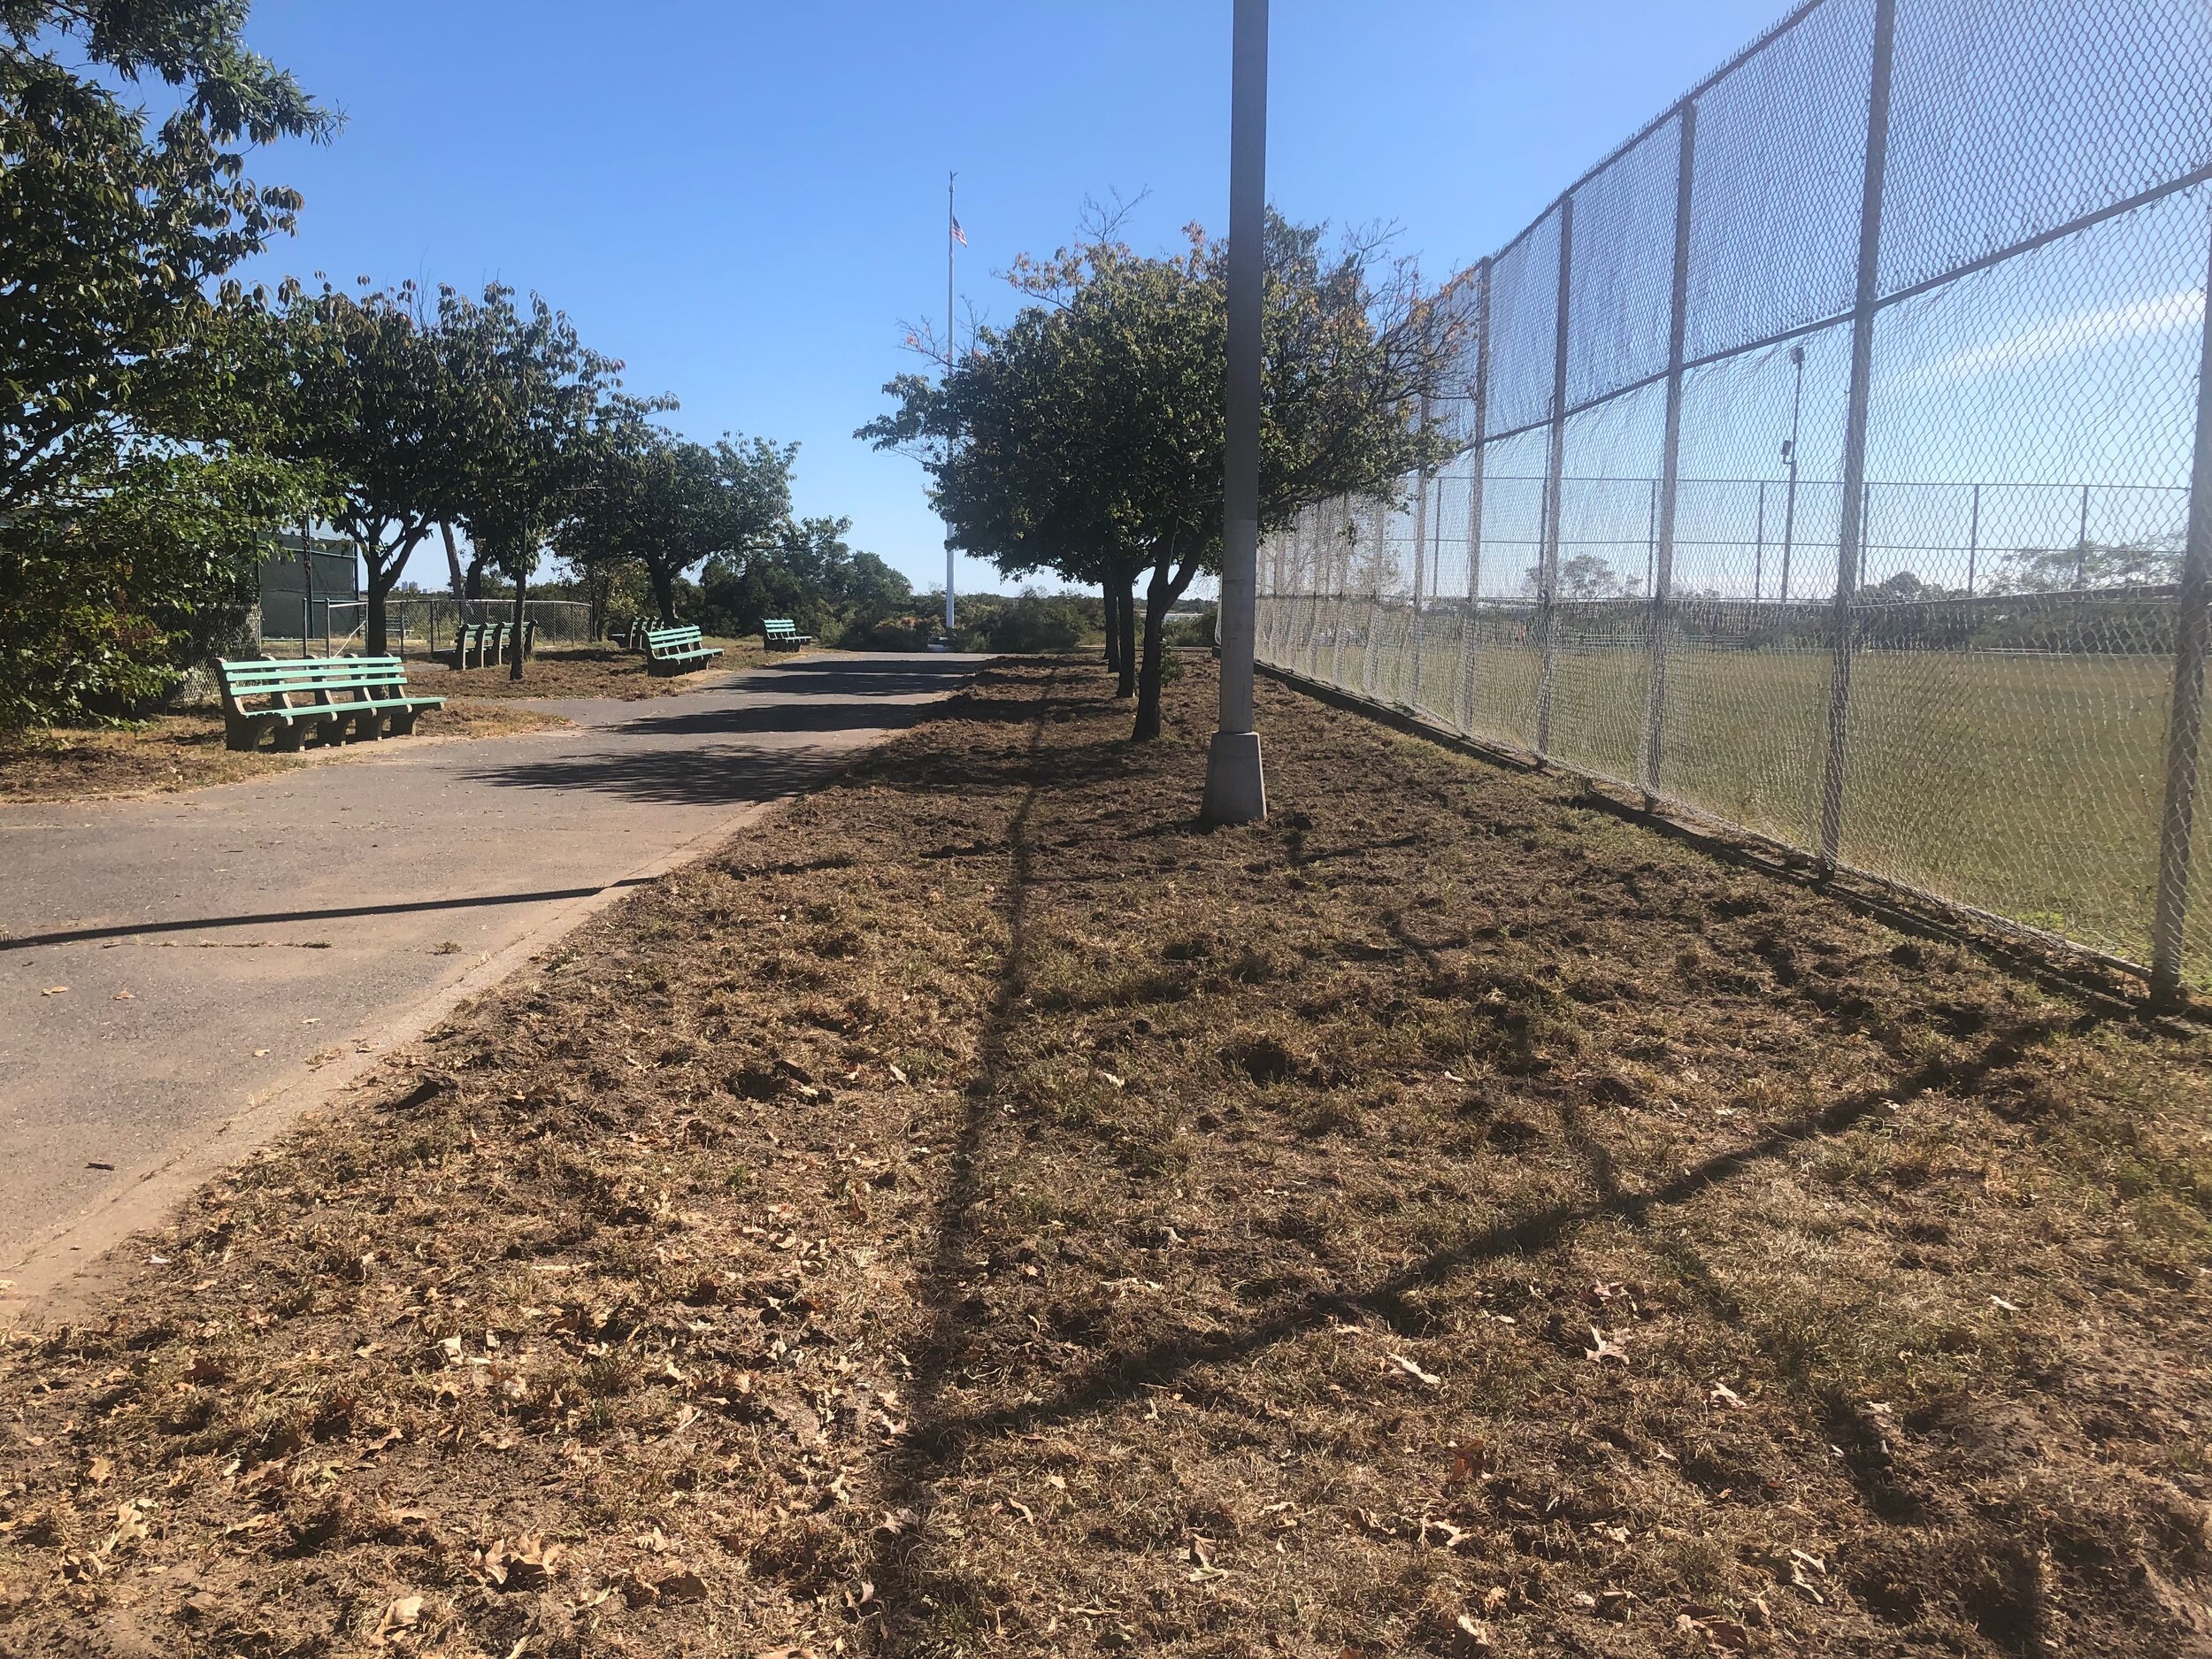 Turf removed along central pathway